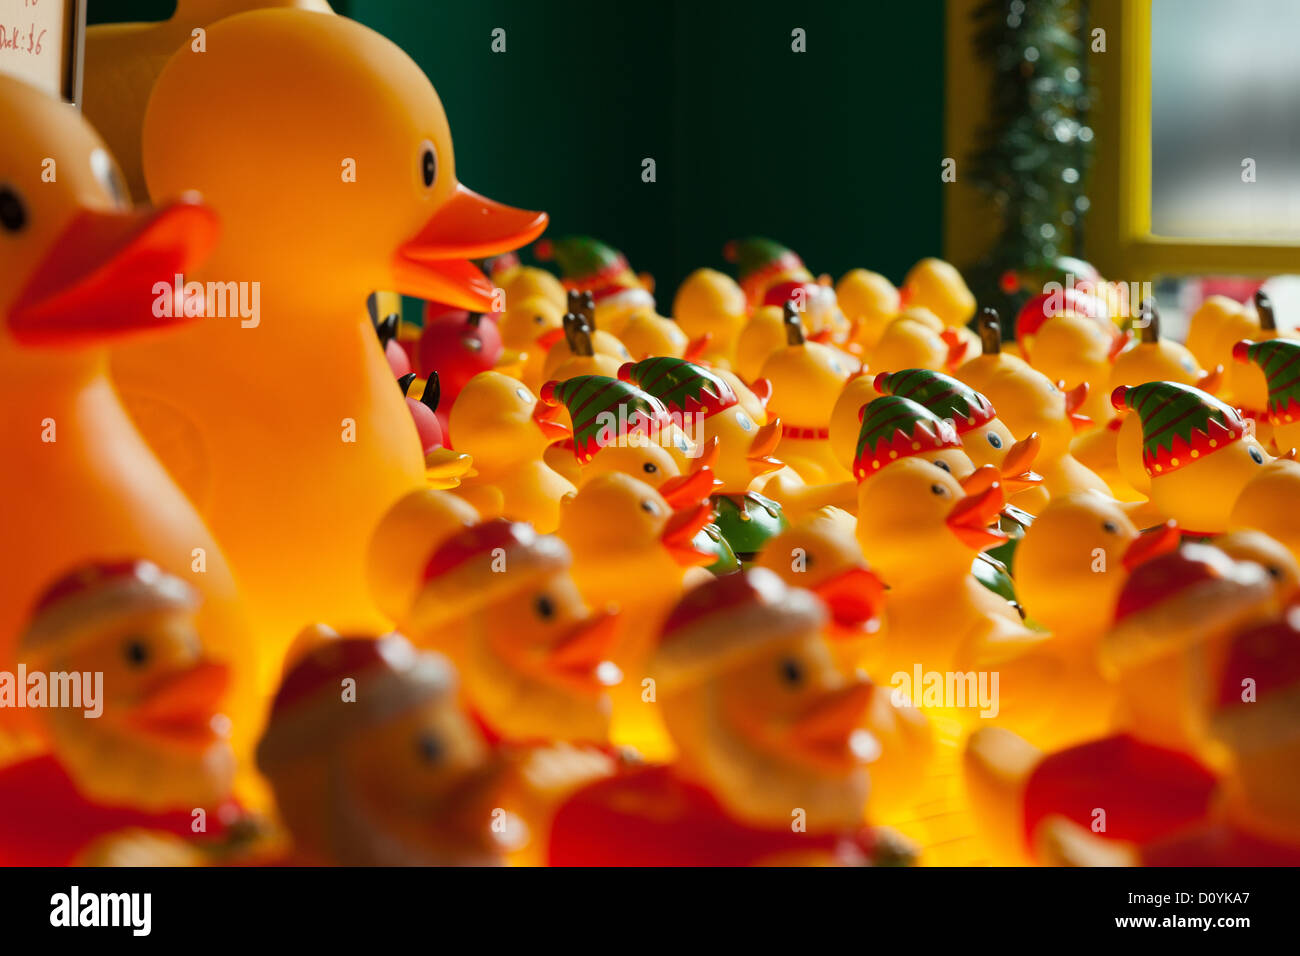 Holiday rubber ducks wearing Christmas hats Stock Photo